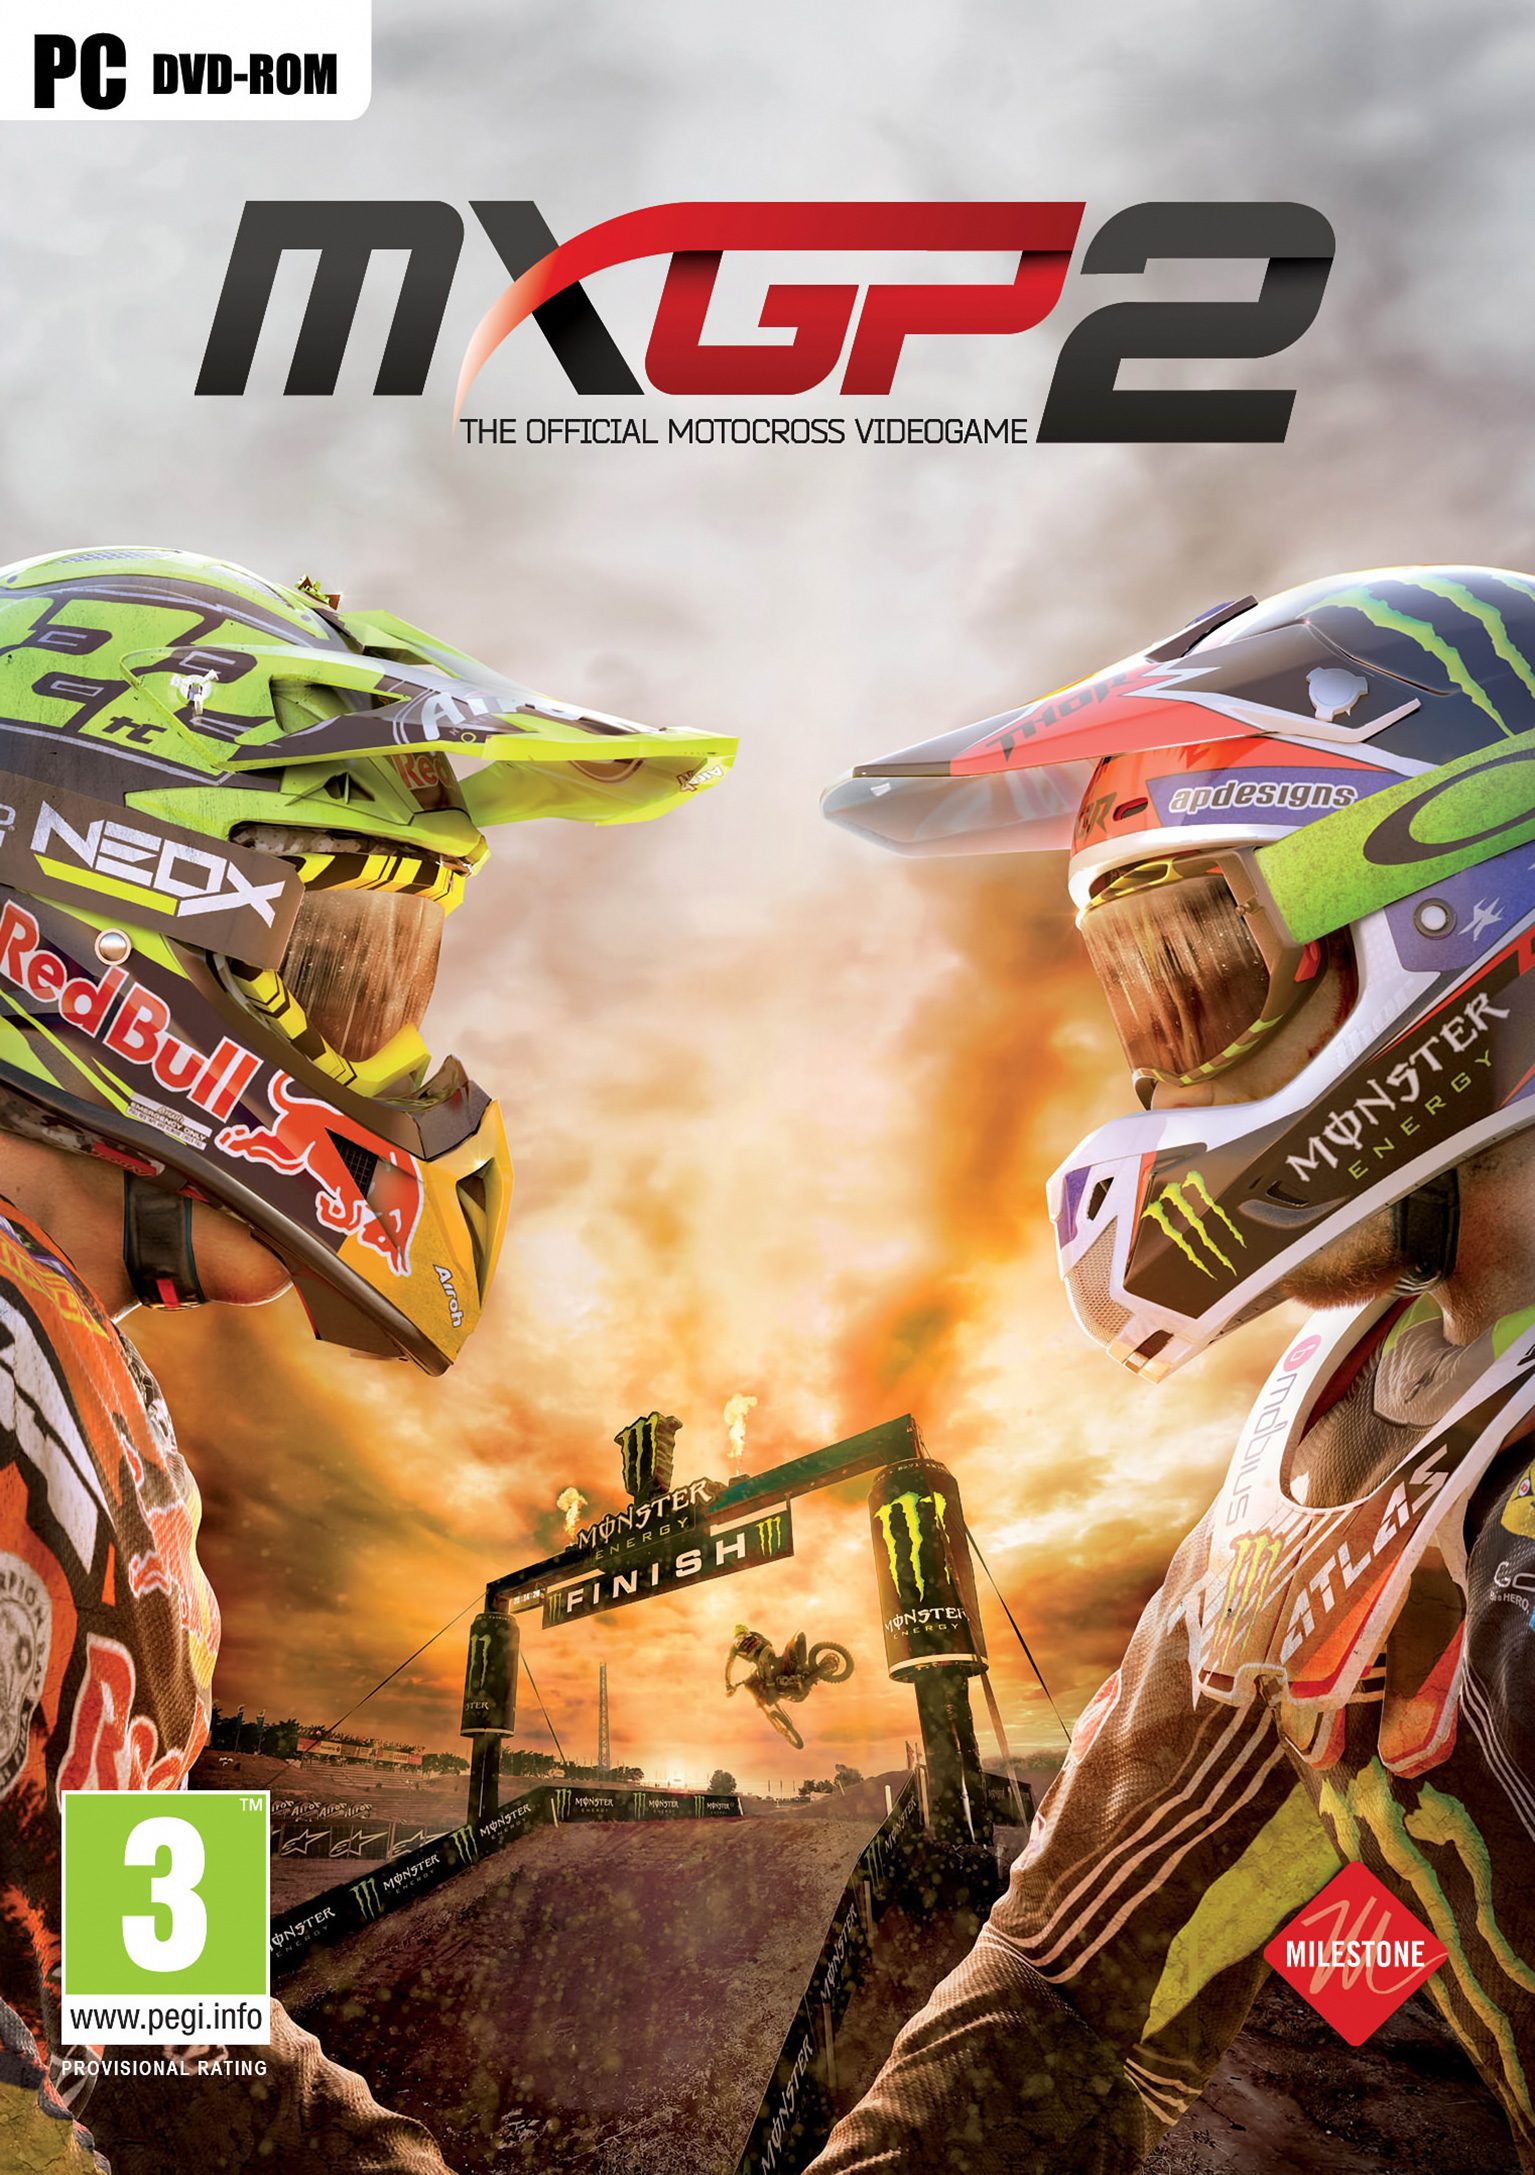 MXGP 2 - The Official Motocross Videogame - pedn DVD obal